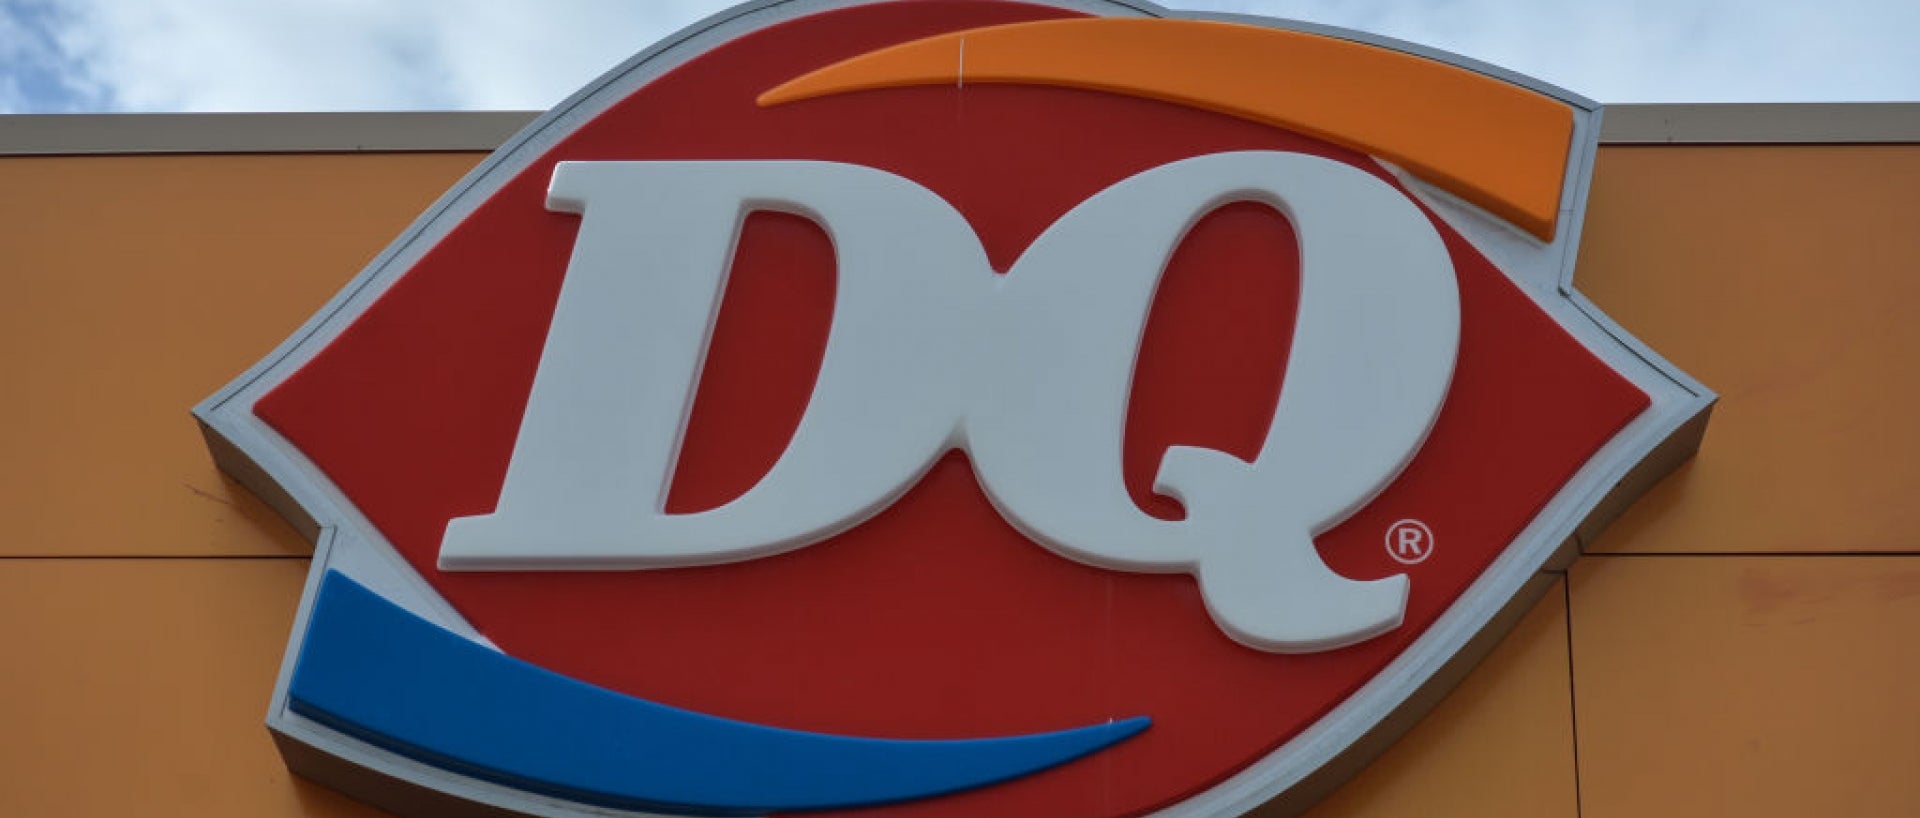 Dairy Queen storefront sign